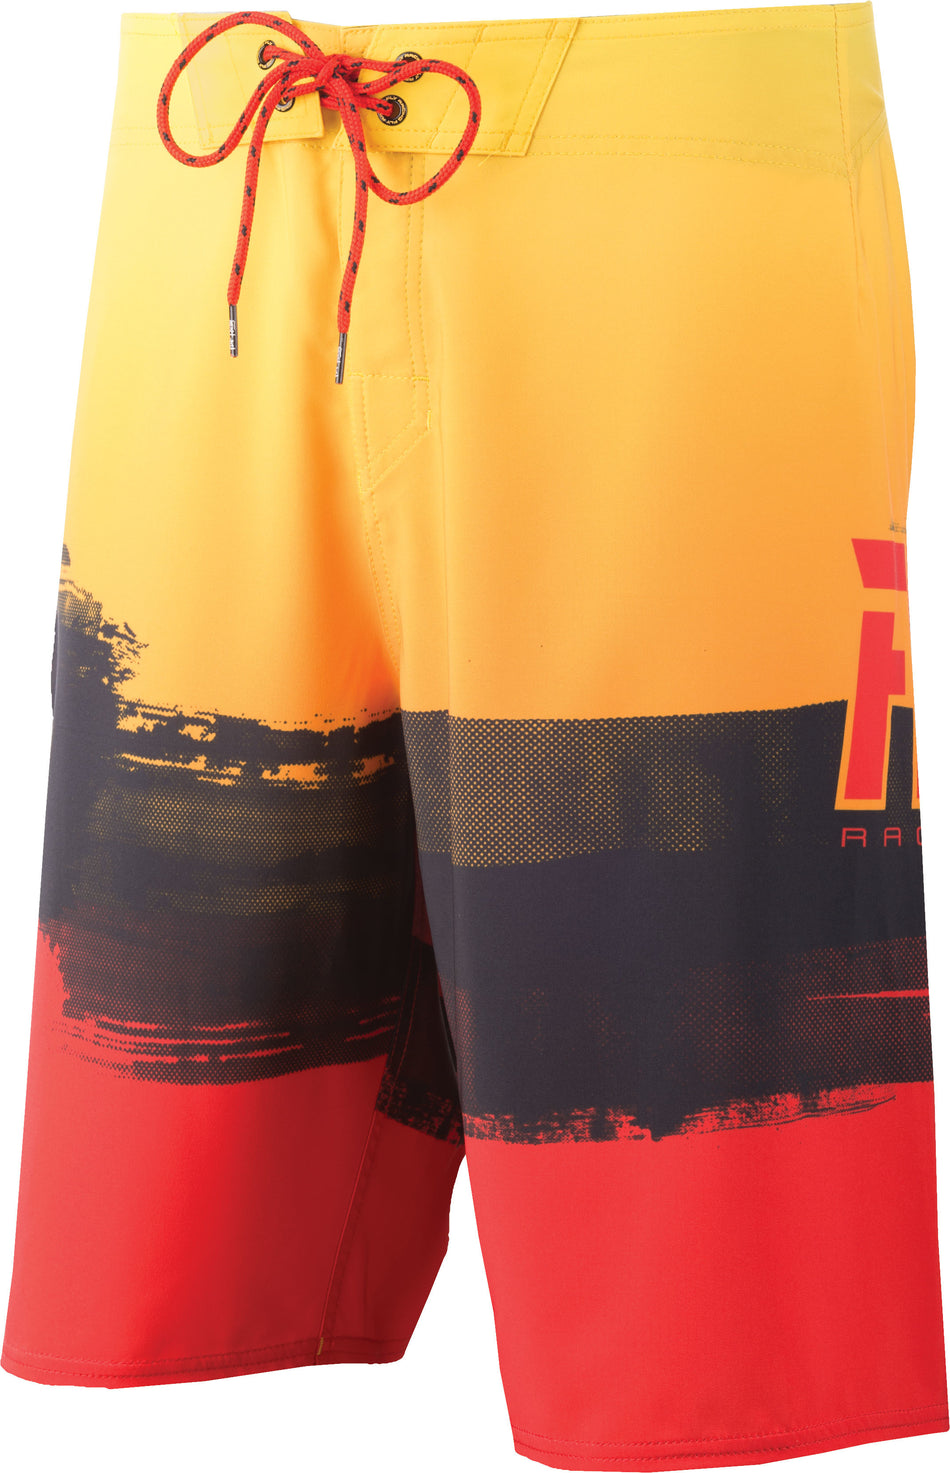 FLY RACING Fly Paint Slinger Boardshorts Red/Yellow Sz 28 353-19428